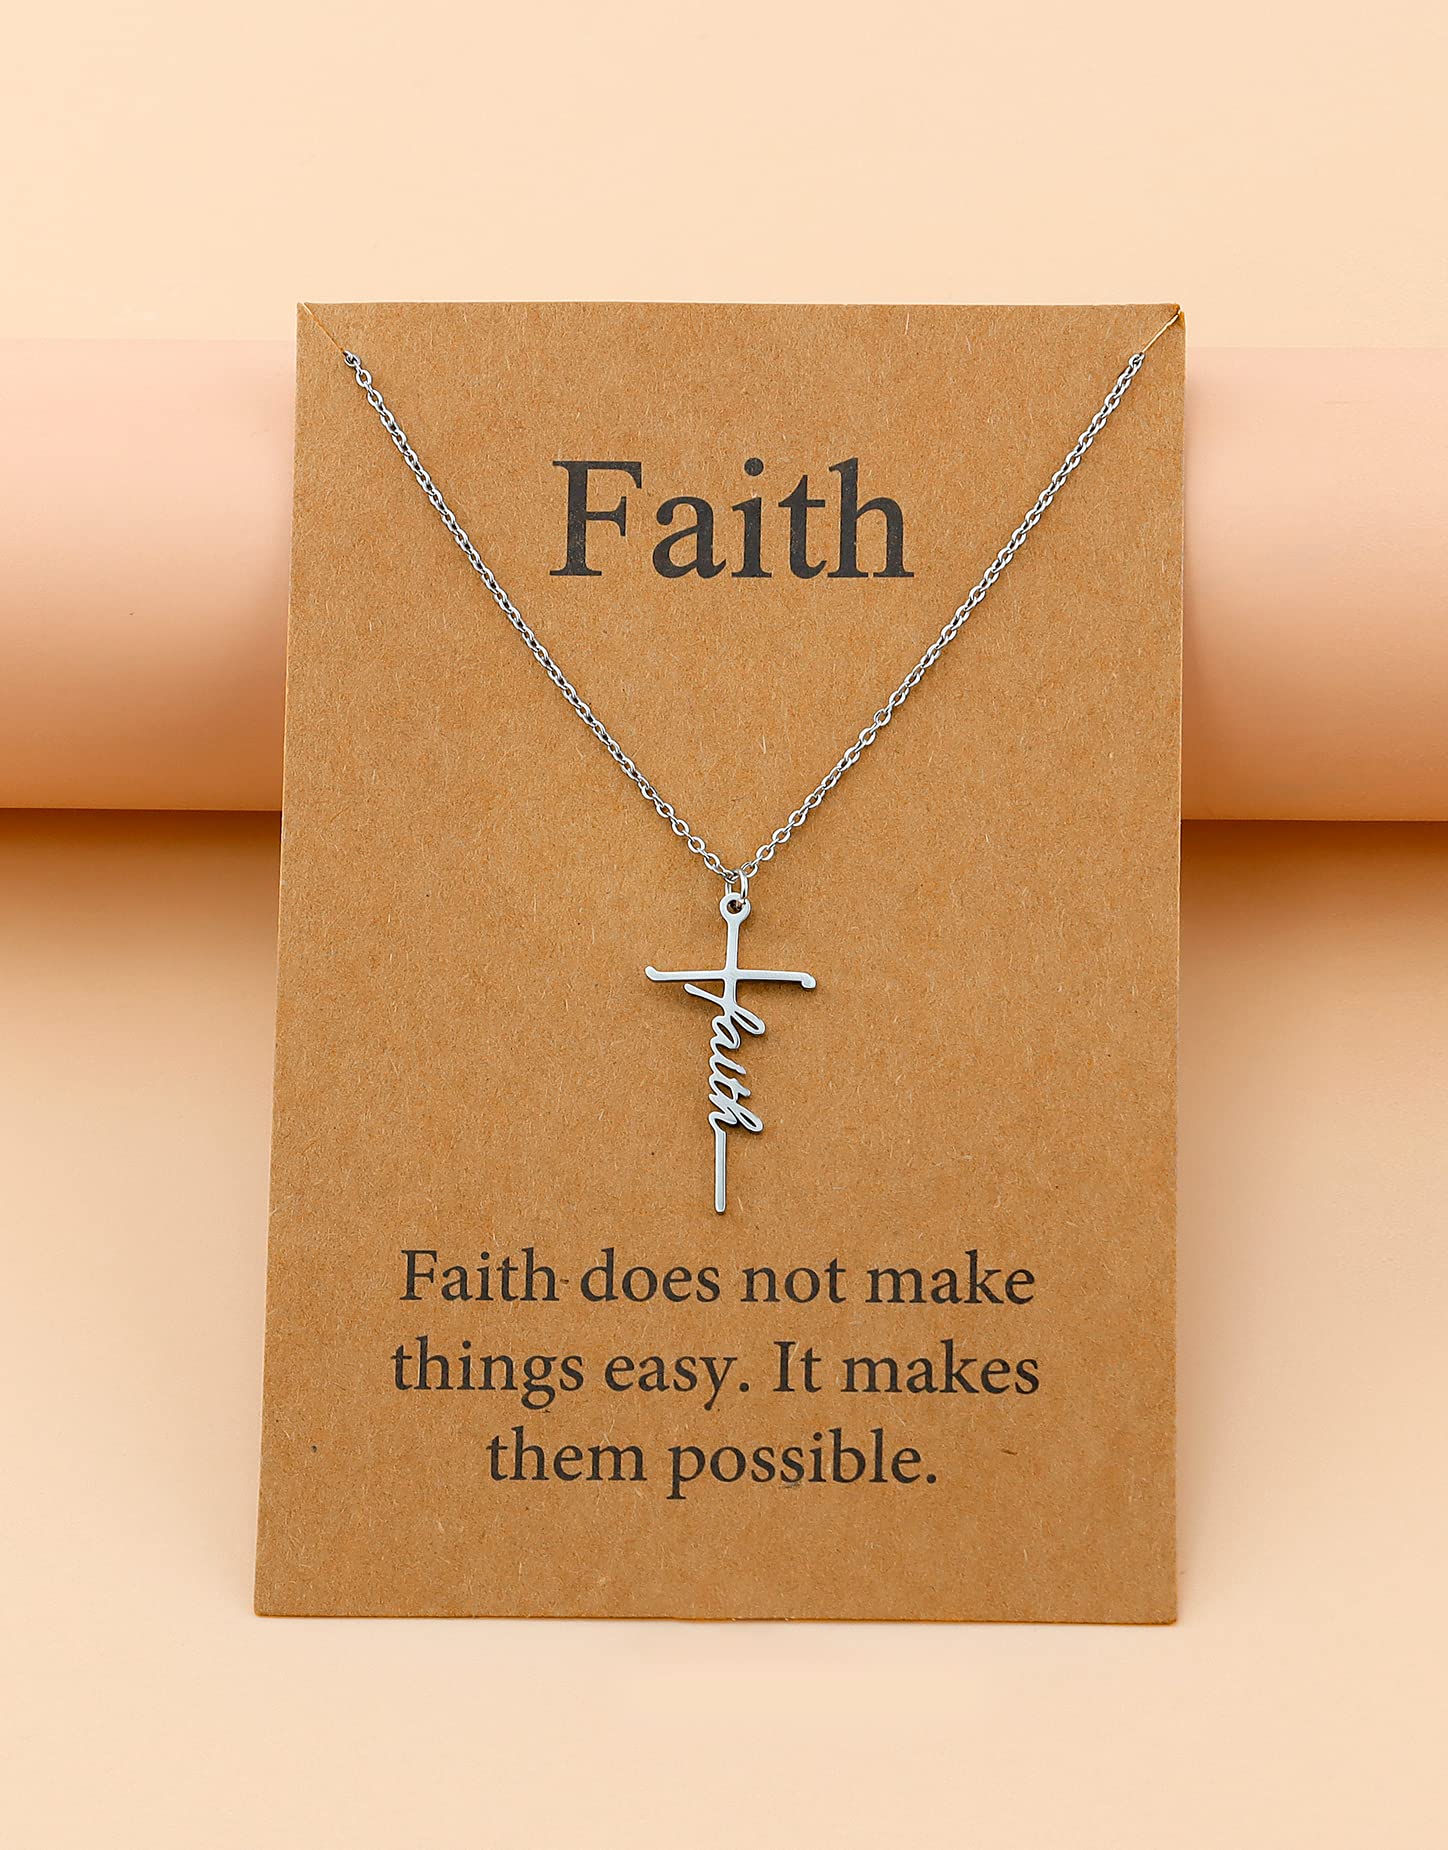 Lcherry Faith Cross Necklace for Women Religious Gifts for Women Christian Jewelry Gifts for Women